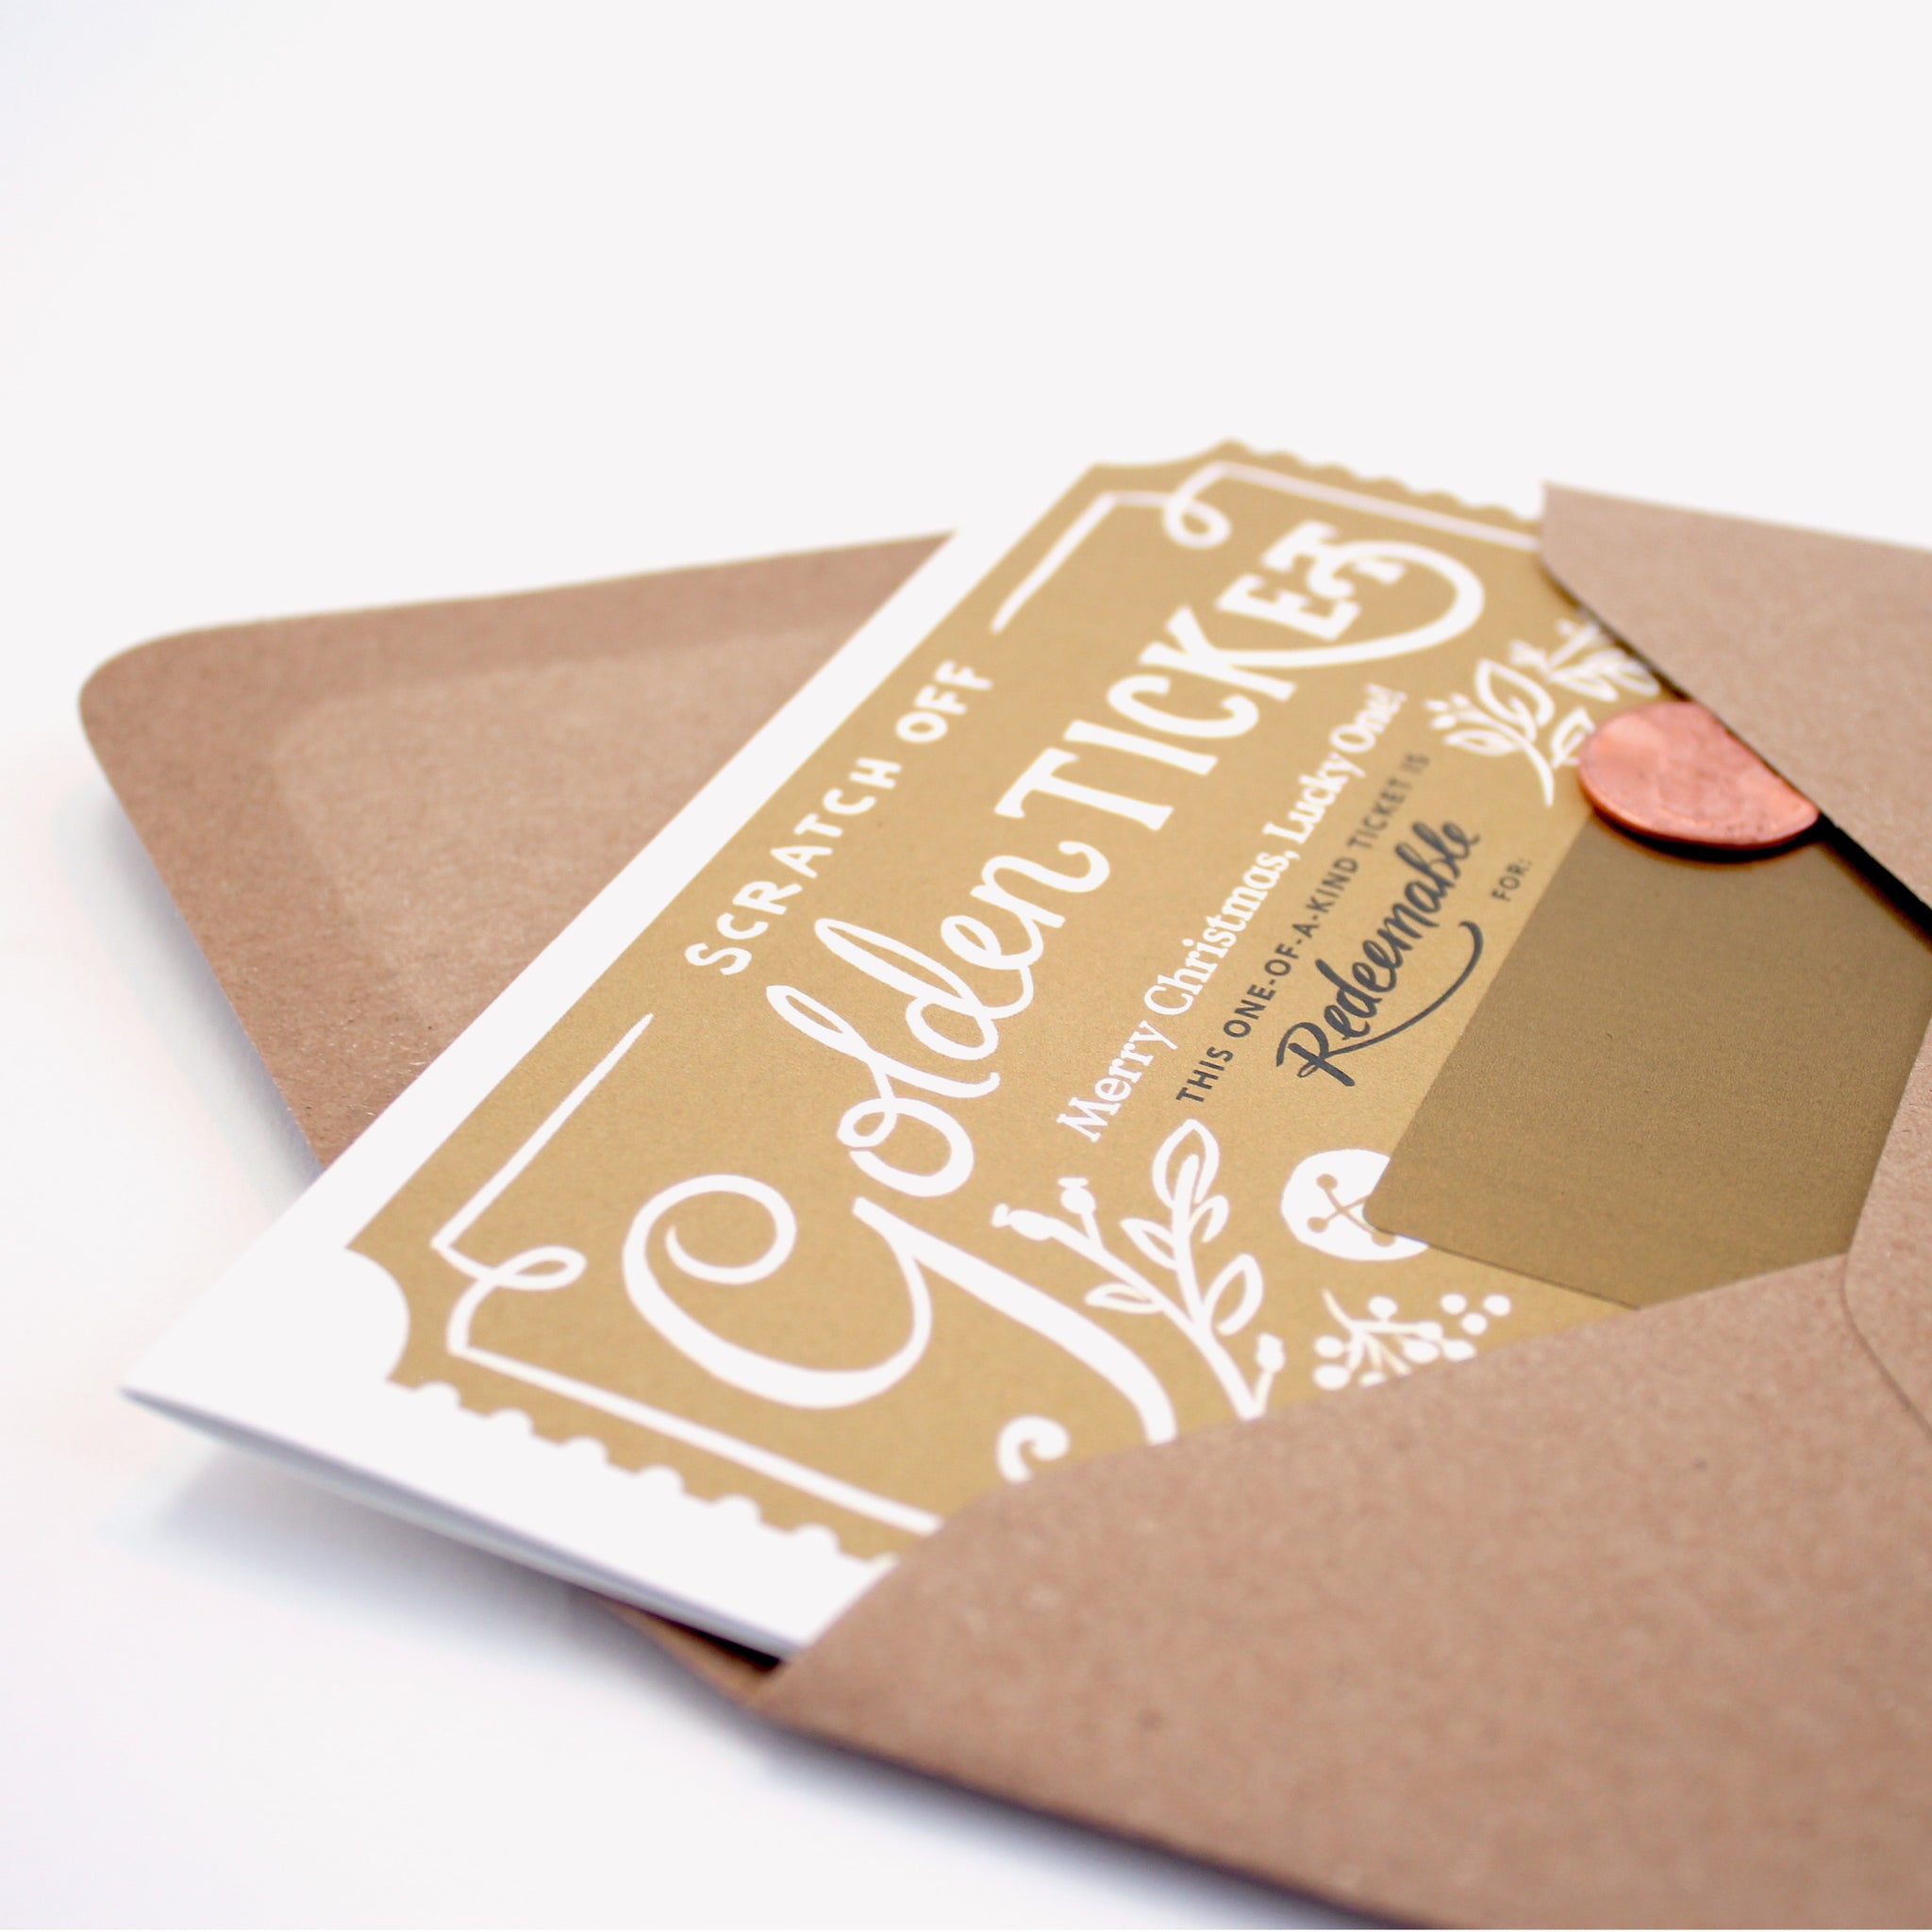 Golden Ticket Christmas Scratch-off Card – Inklings Paperie